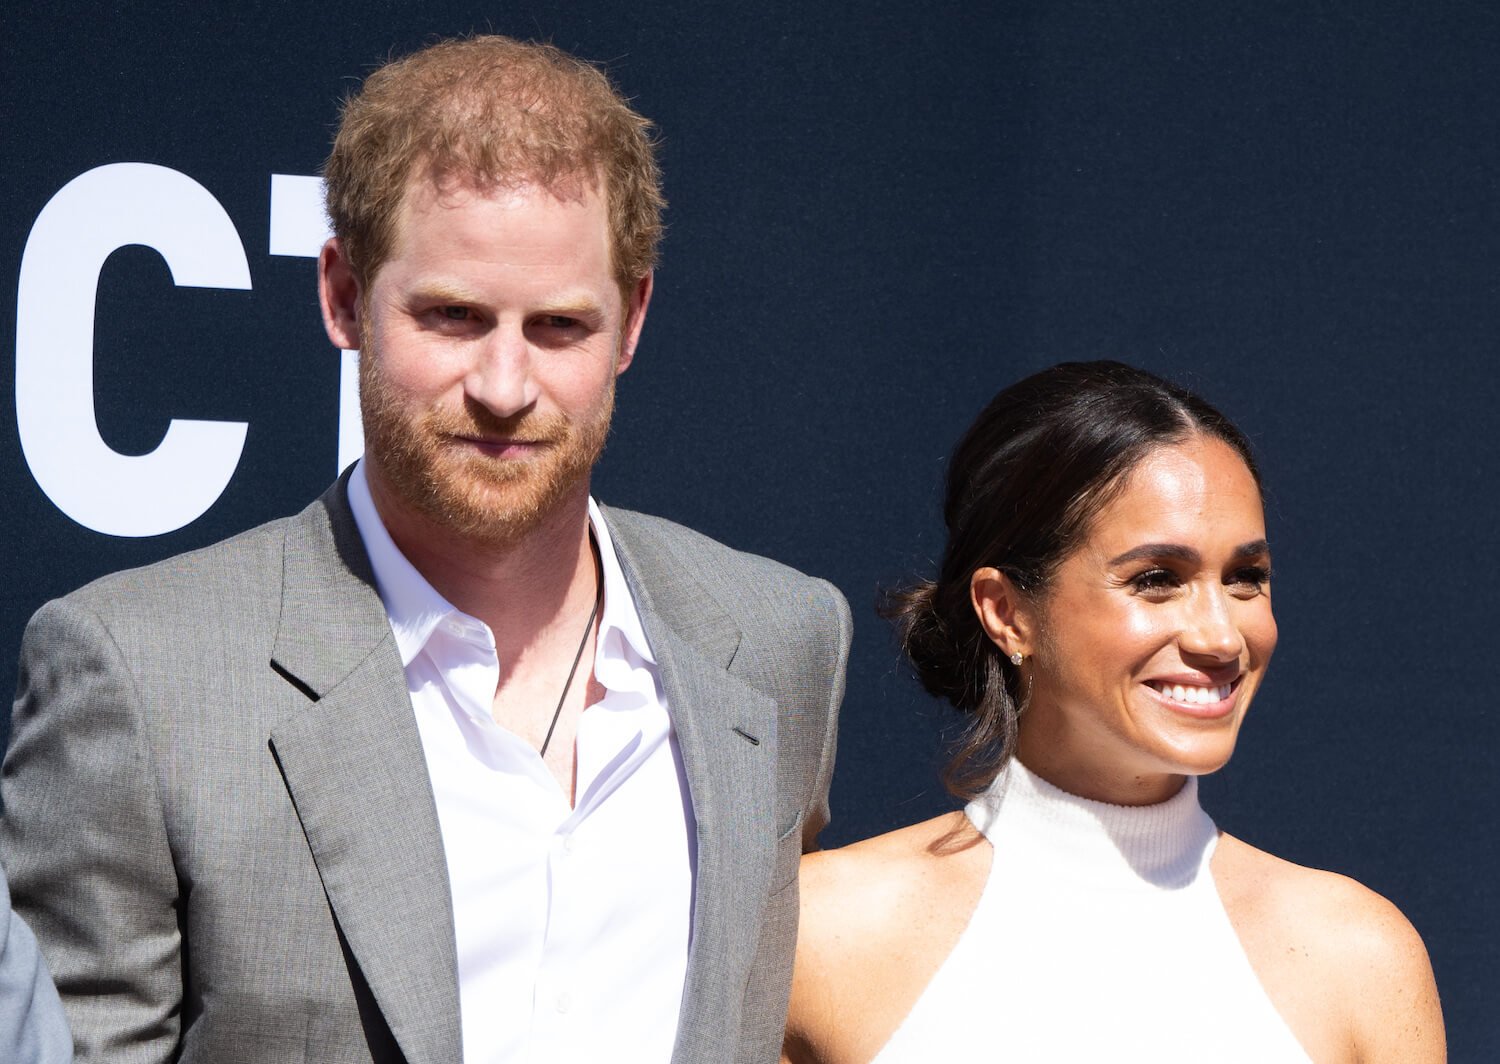 Prince Harry and Meghan Markle struggle with pecking order popularity in us